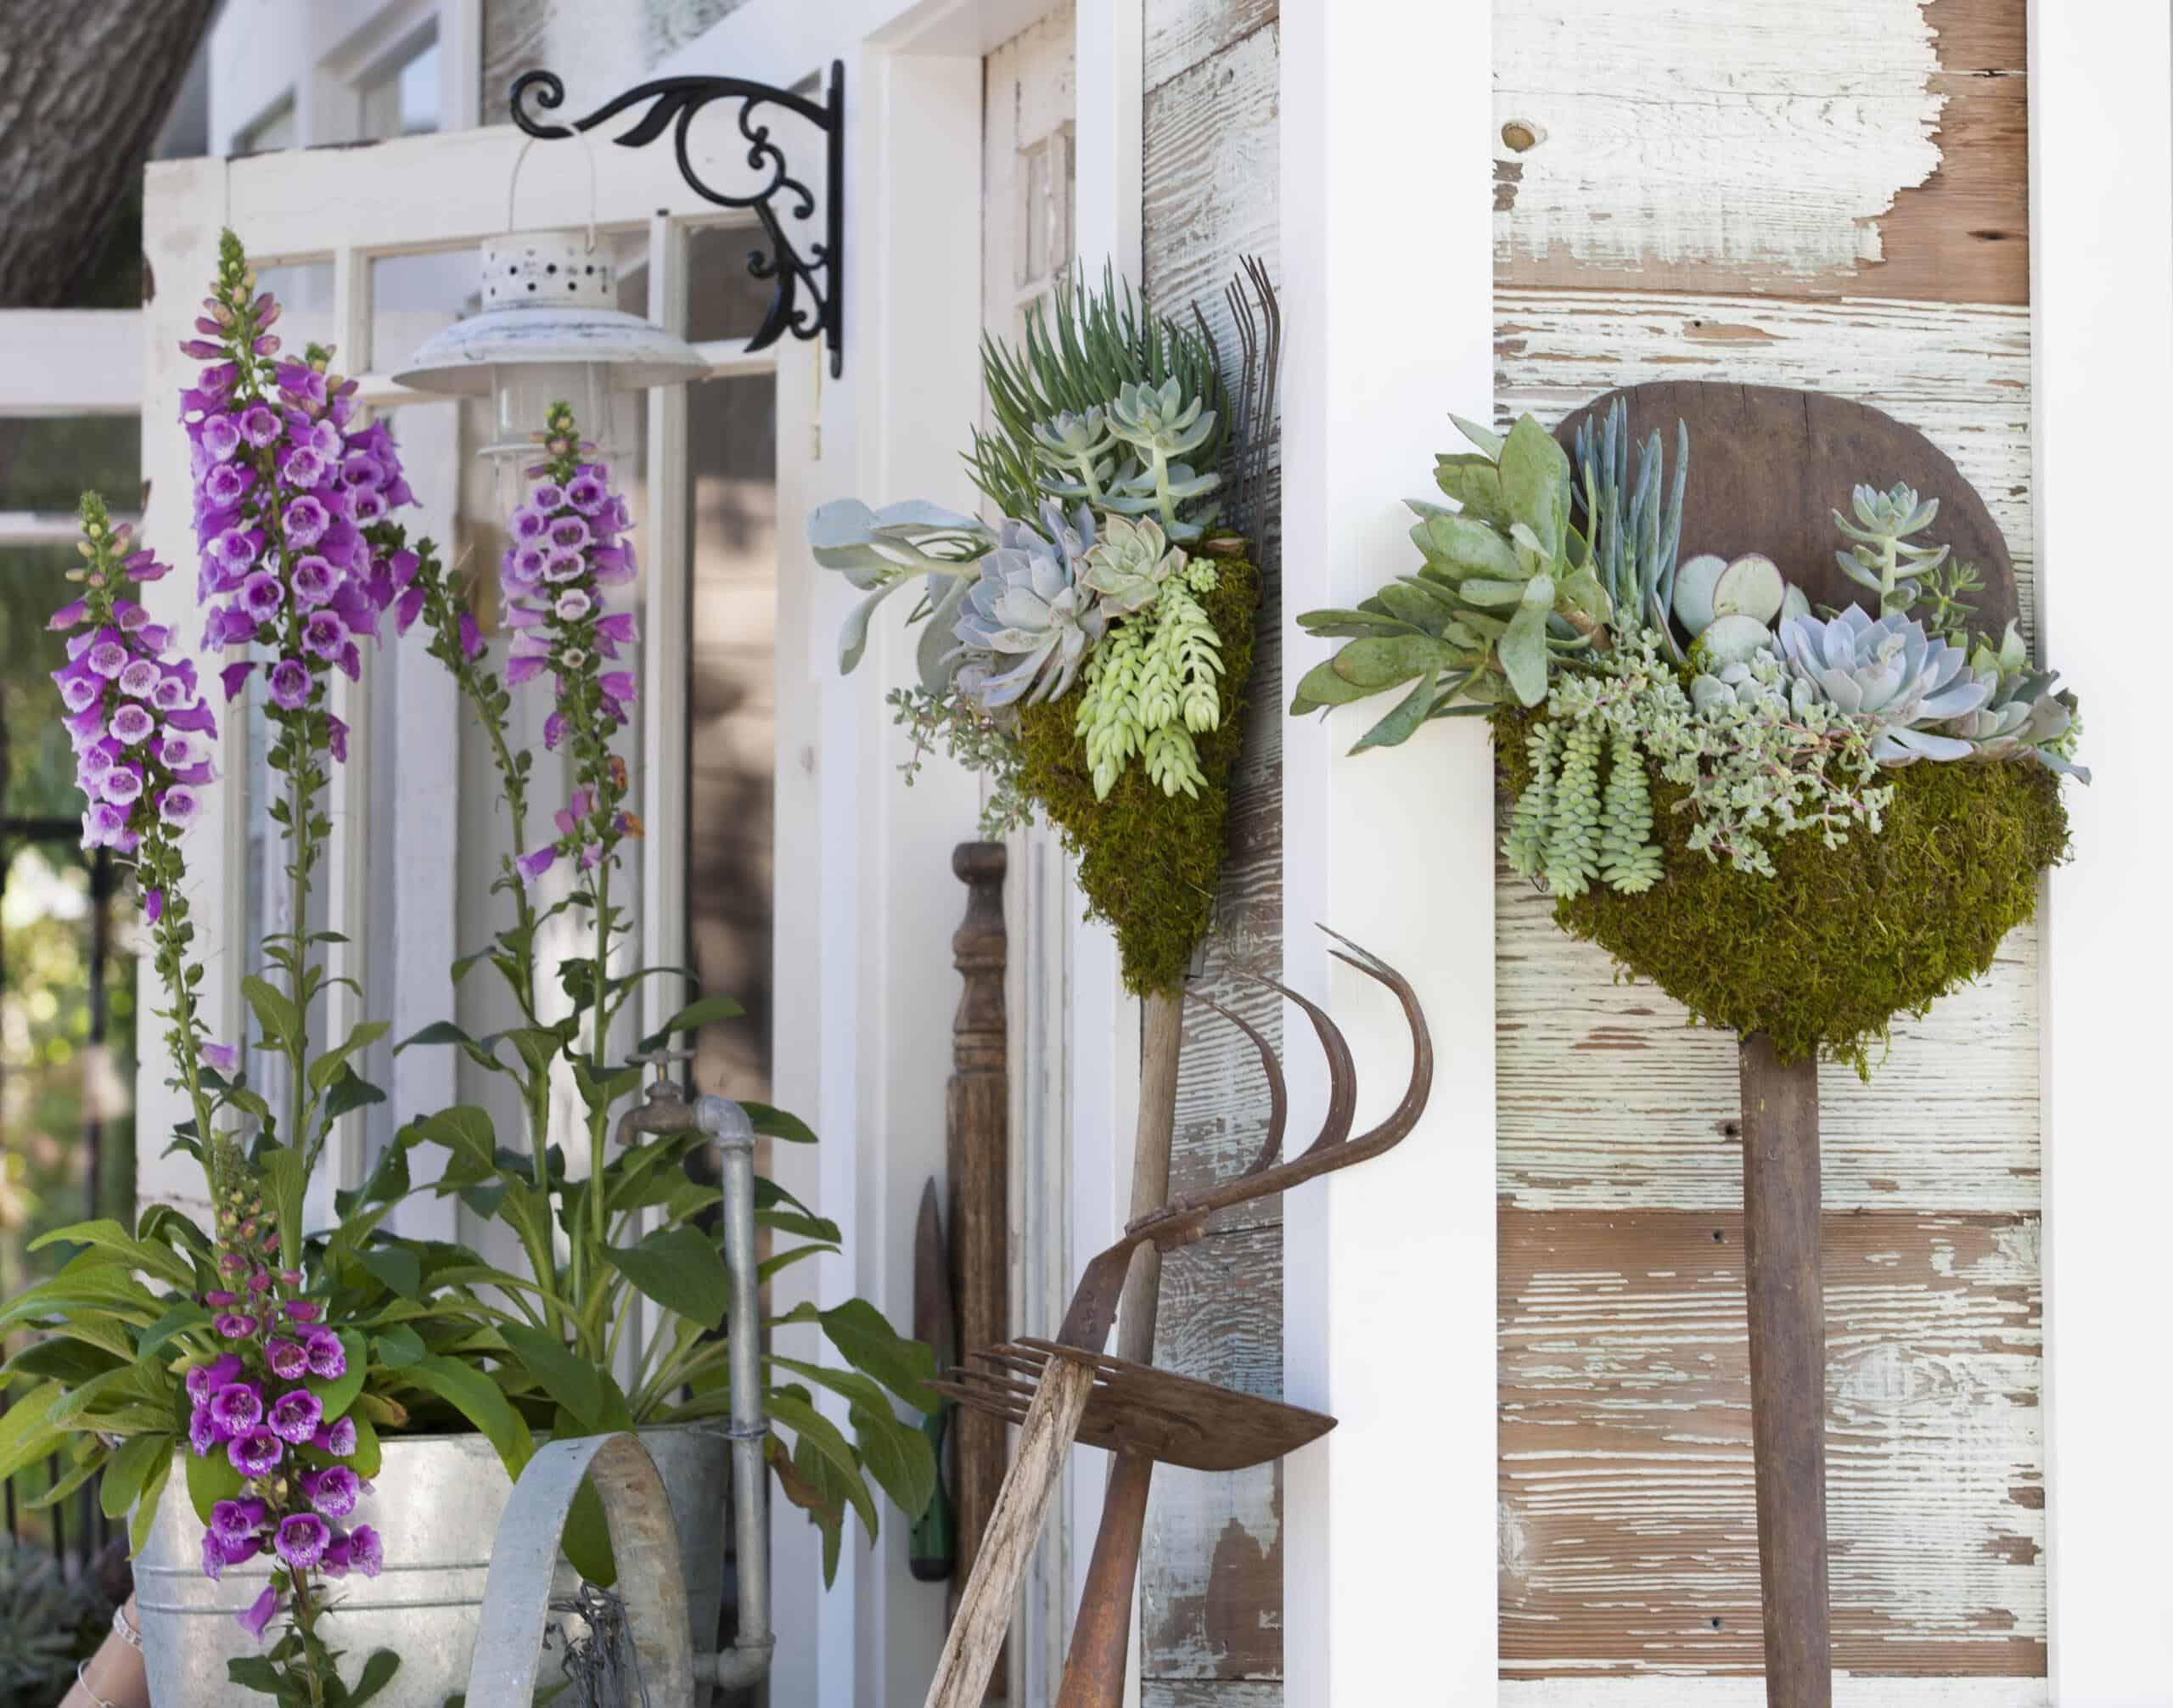 How to Repurpose Old Tools into Succulent Planters